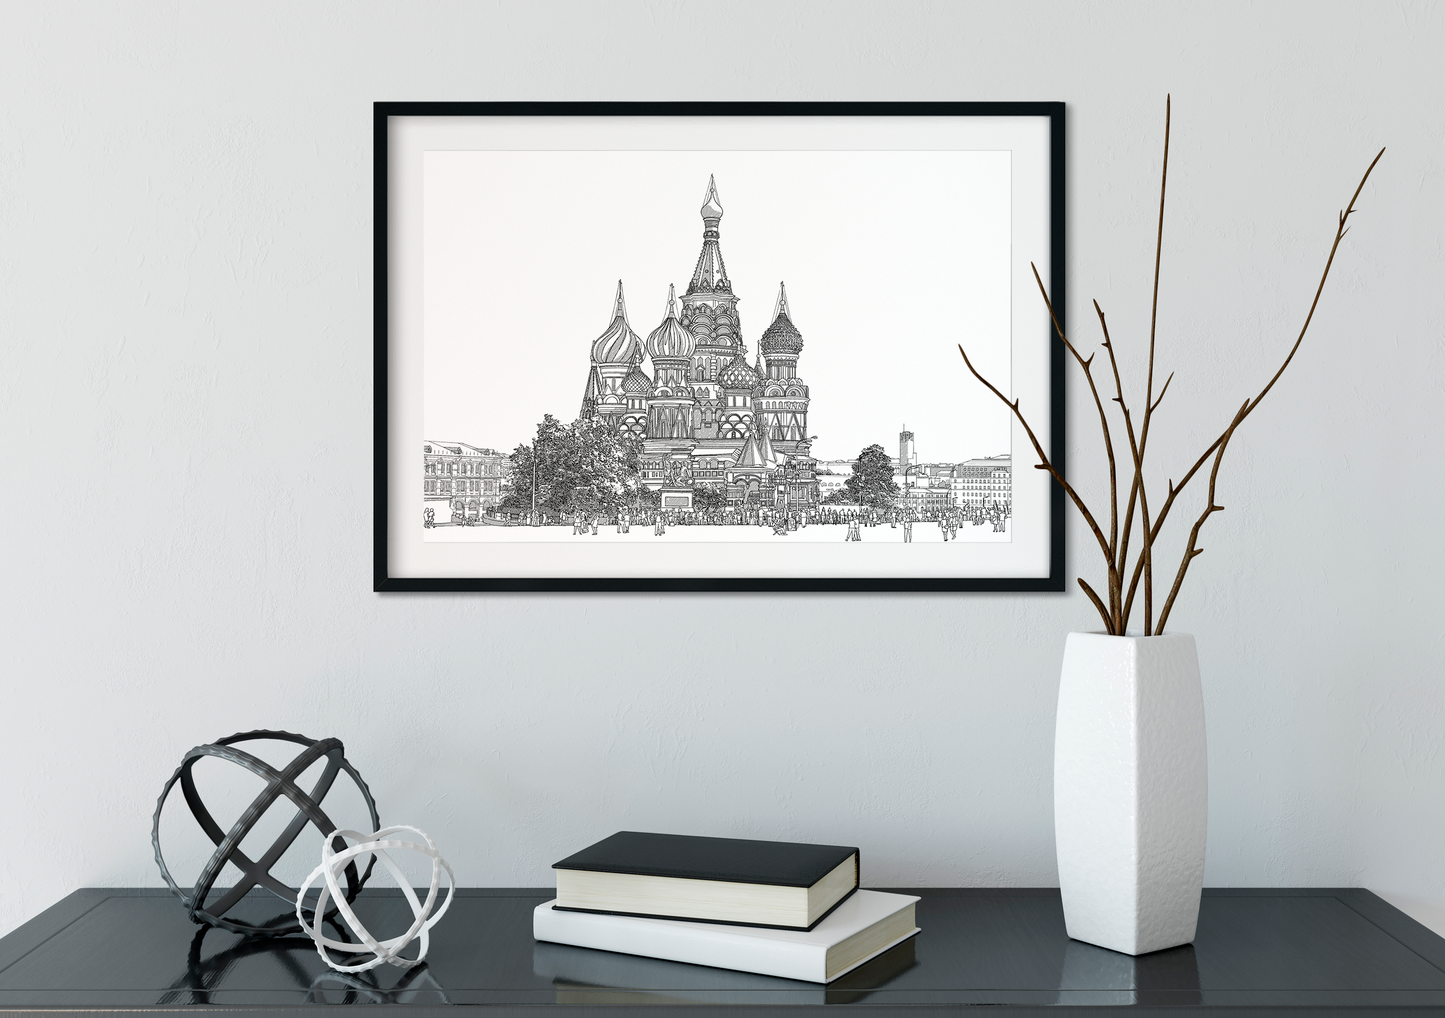 Landmark Wall Art - Hand Drawn Wall Art of Famous Landmark St. Basil’s Cathedral, Moscow